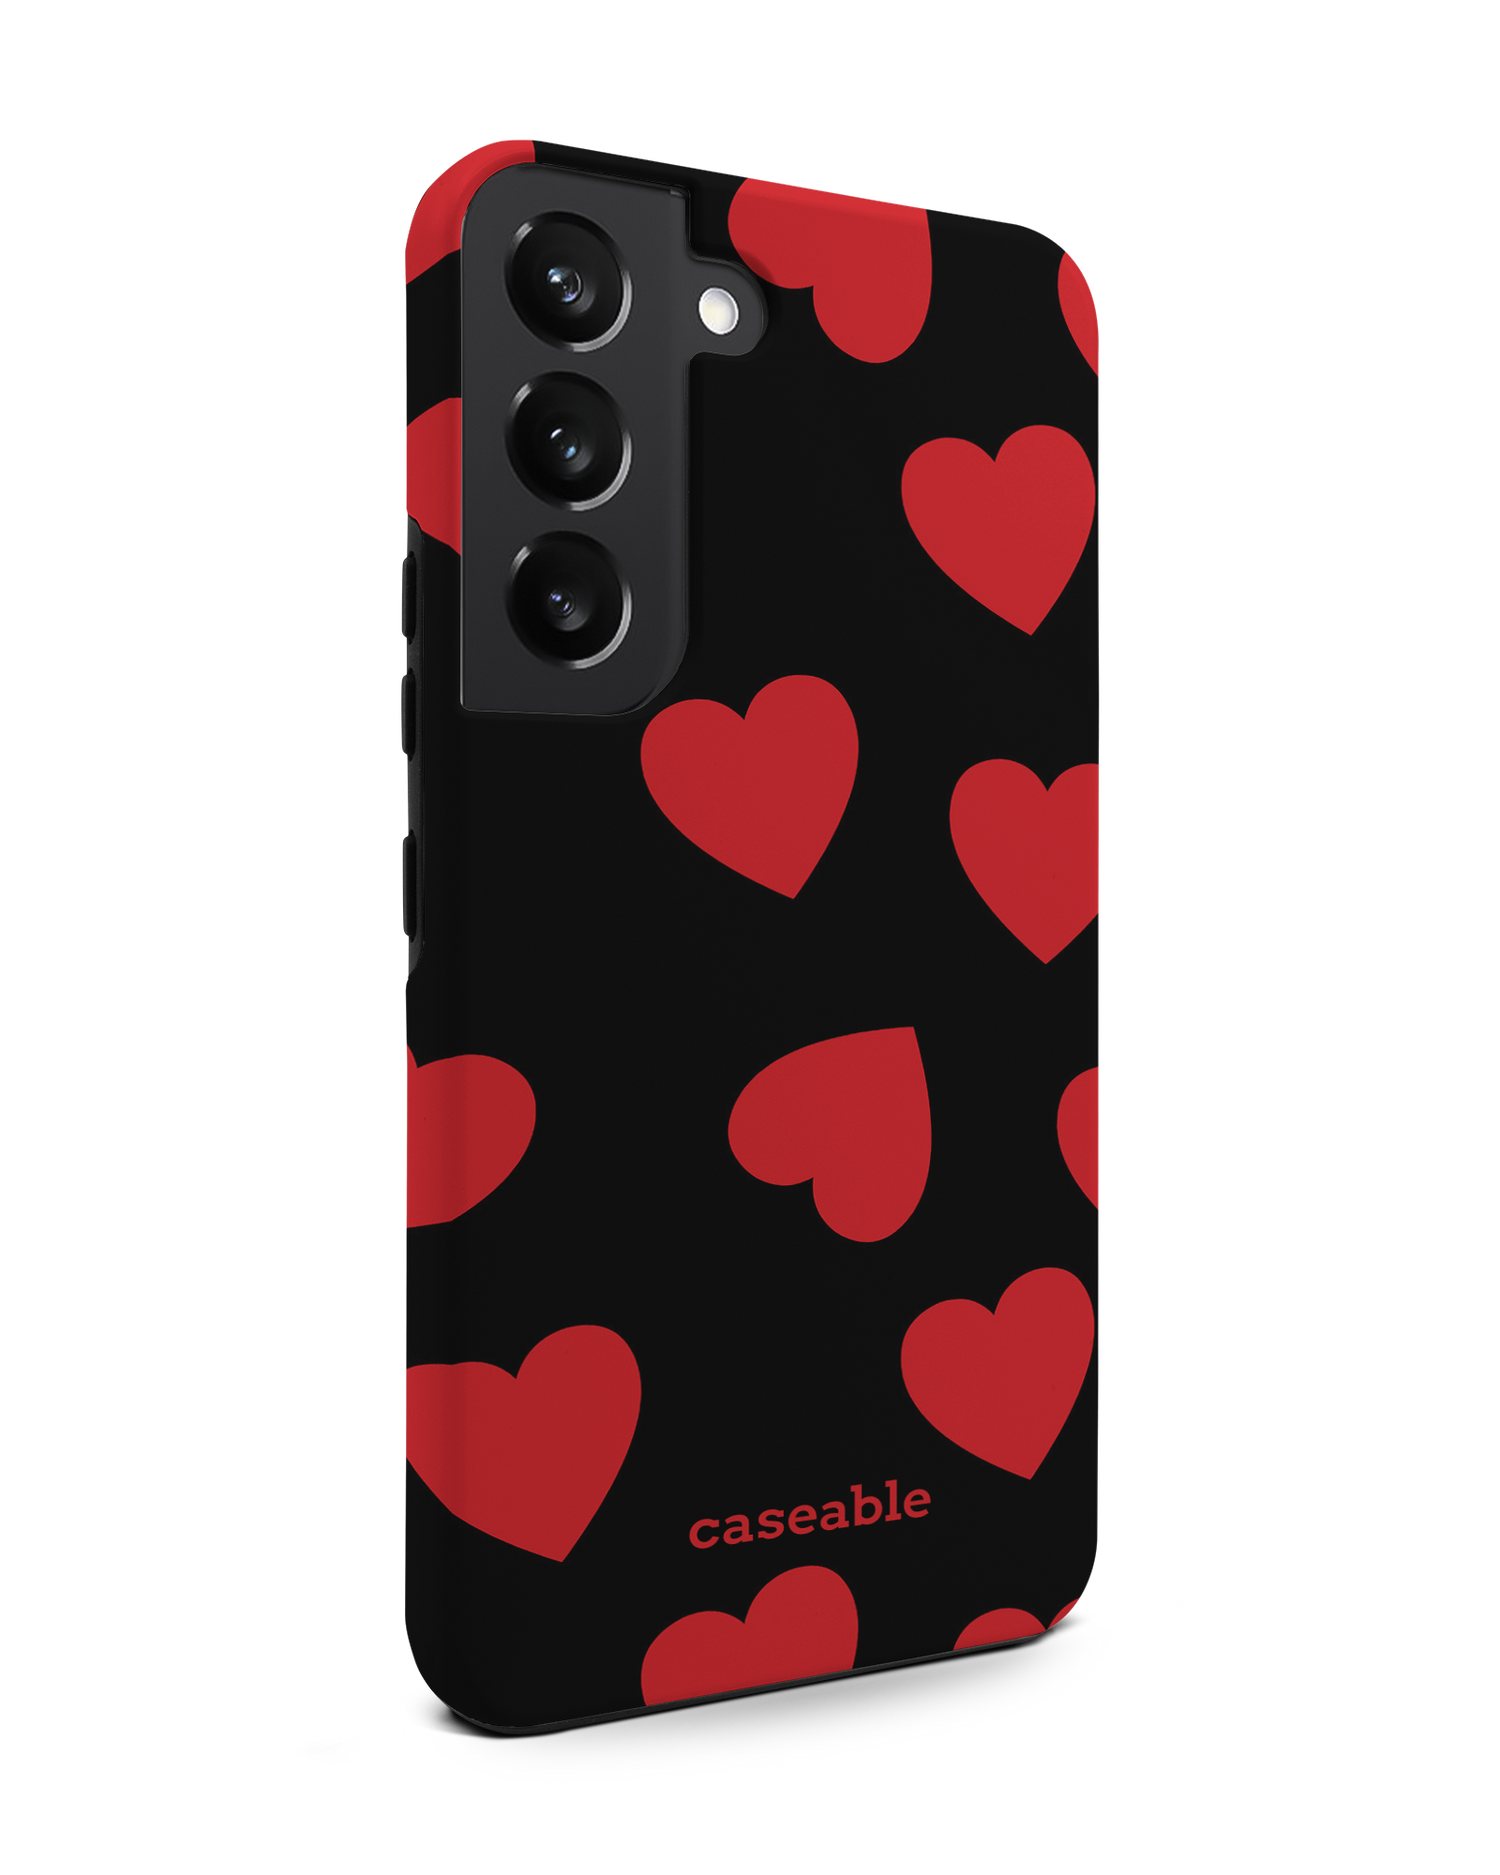 Repeating Hearts Premium Phone Case Samsung Galaxy S22 5G: View from the left side